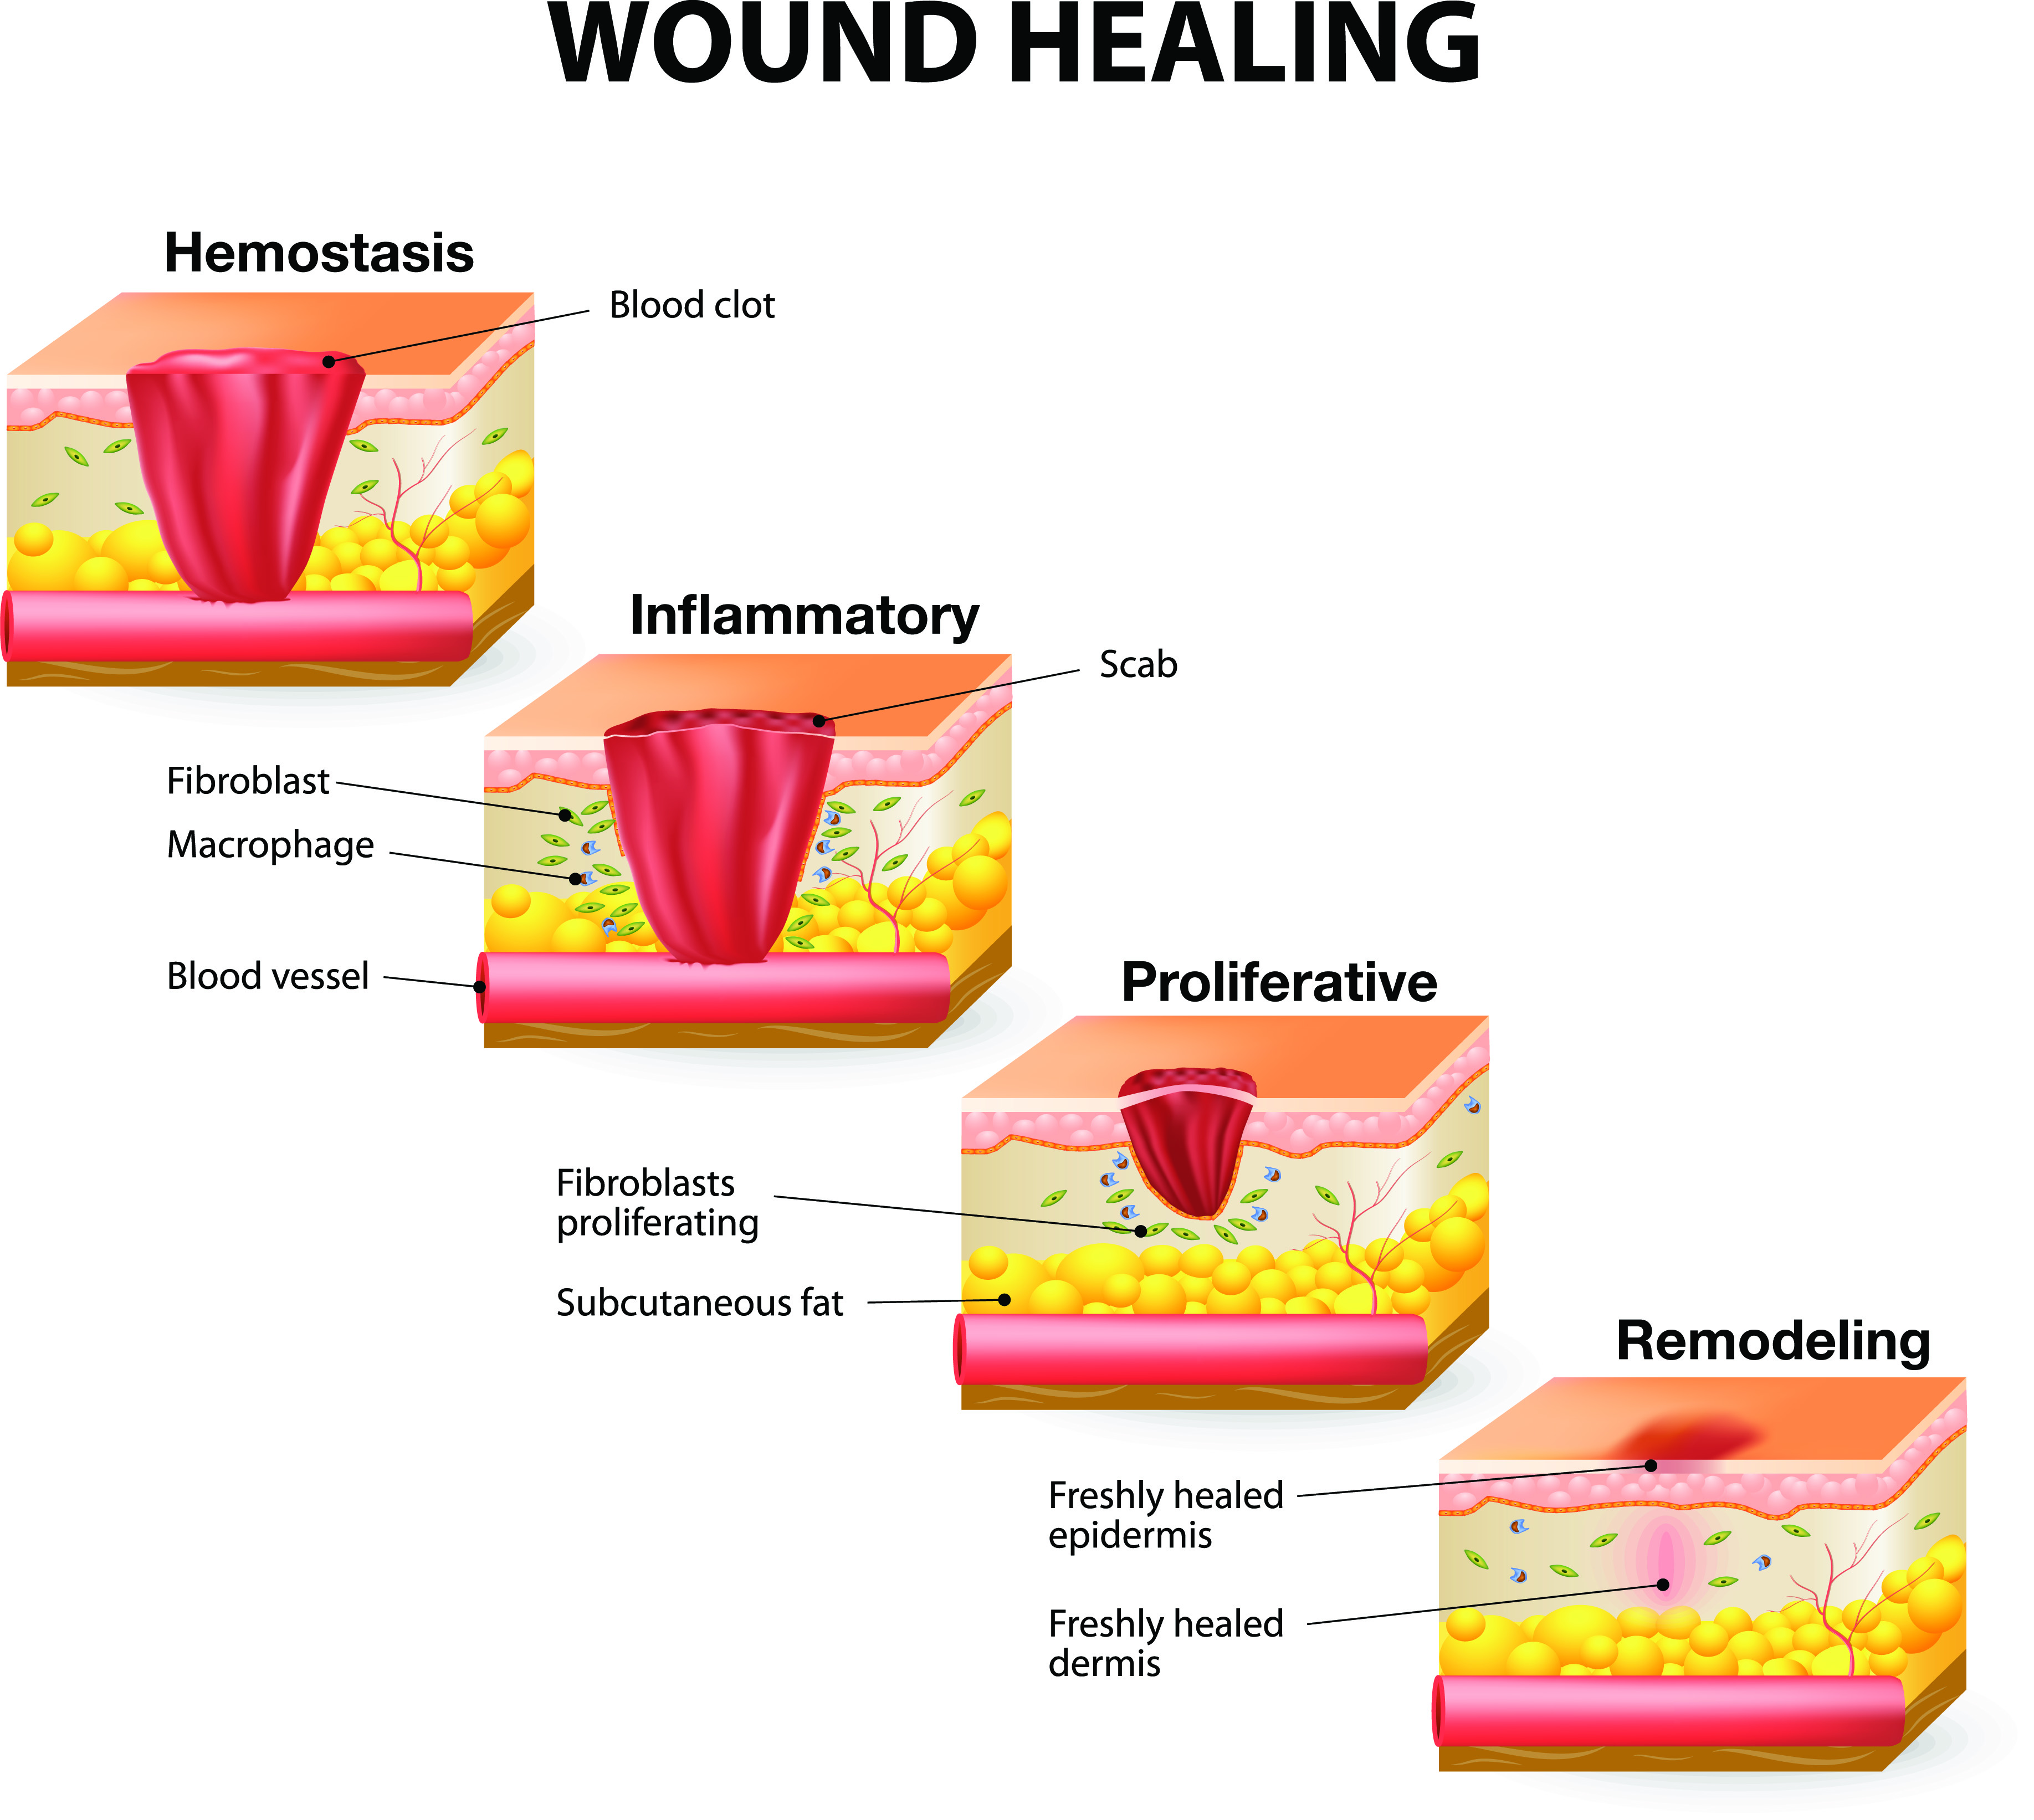 How Wounds Heal: The 4 Main Phases of Wound Healing | Shield HealthCare